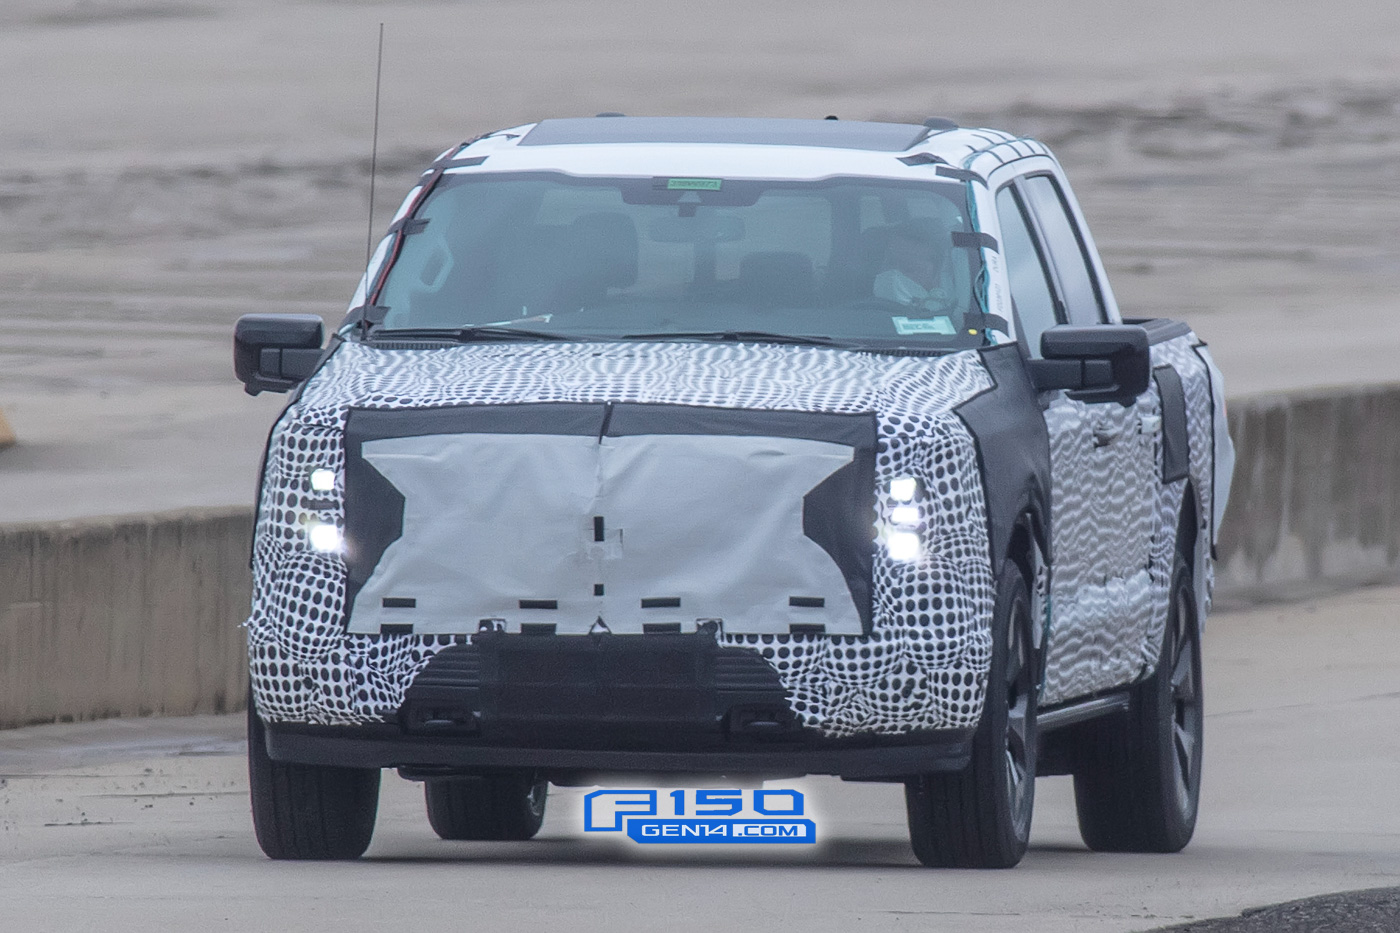 Ford F-150 Lightning Electric F-150 Prototype Caught With Large Mach-E-Style Infotainment Screen ev-f150-electric-mache-large-infotainment-screen-21